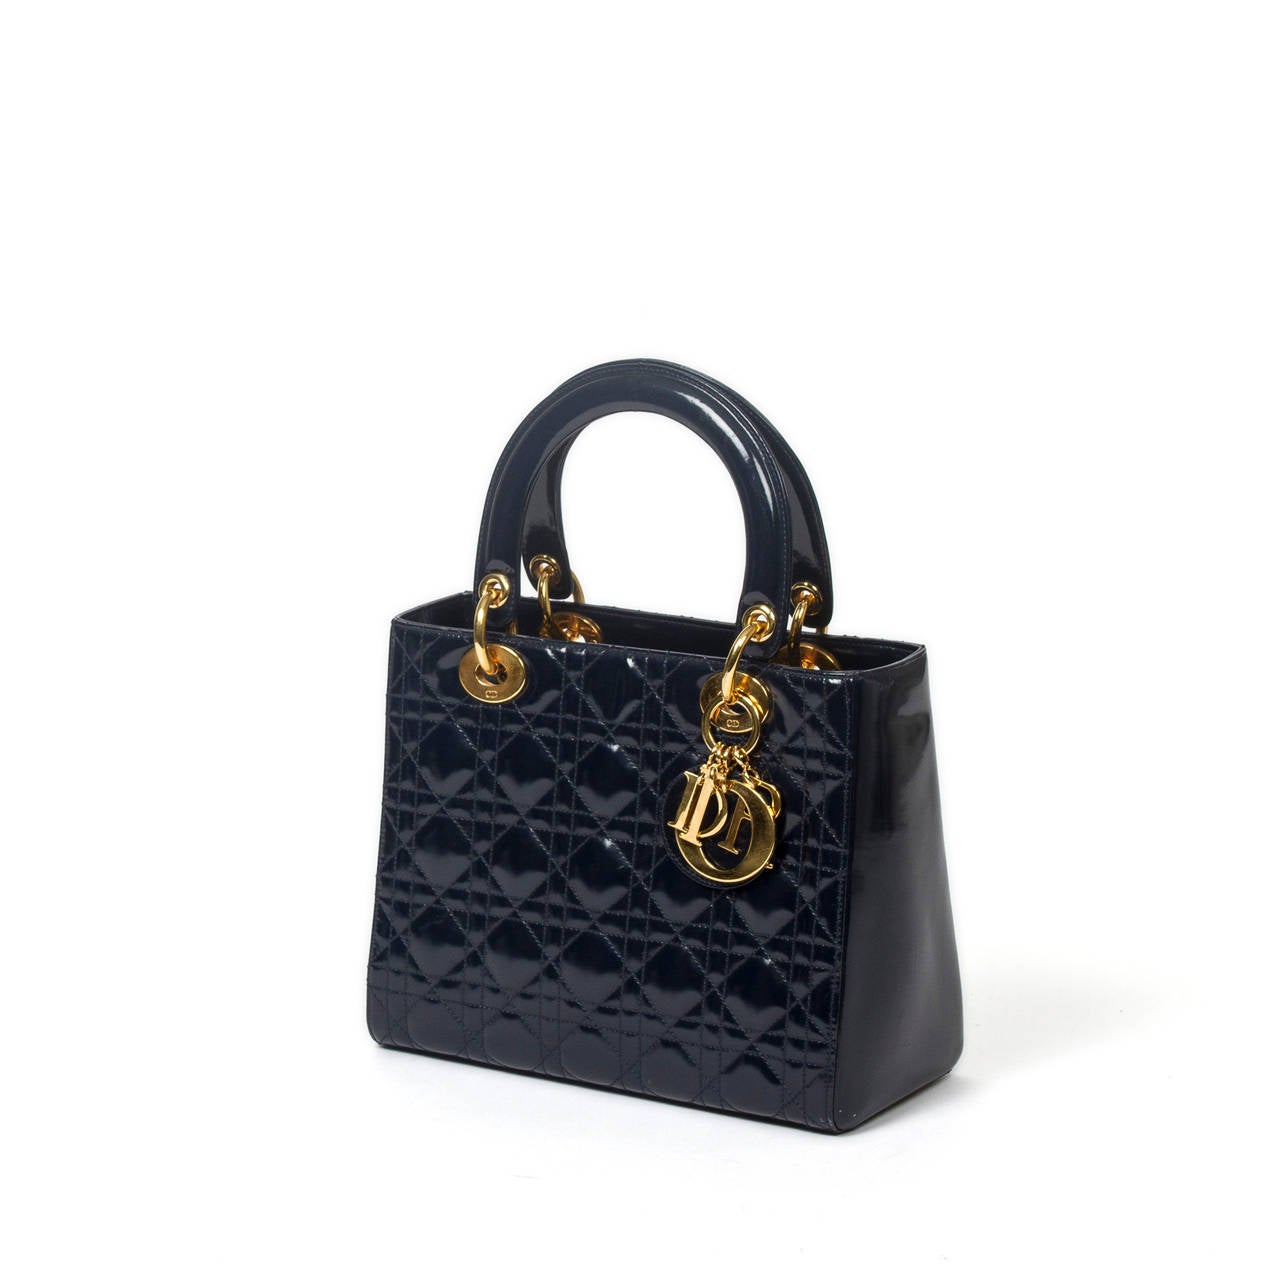 Lady MM in navy color cannage patent leather with shoulder strap and gold tone charms. Black jacquard canvas lined interior with zip pocket. Dustbag included. Few marks on the leather at the handles. Excellent condition overall.